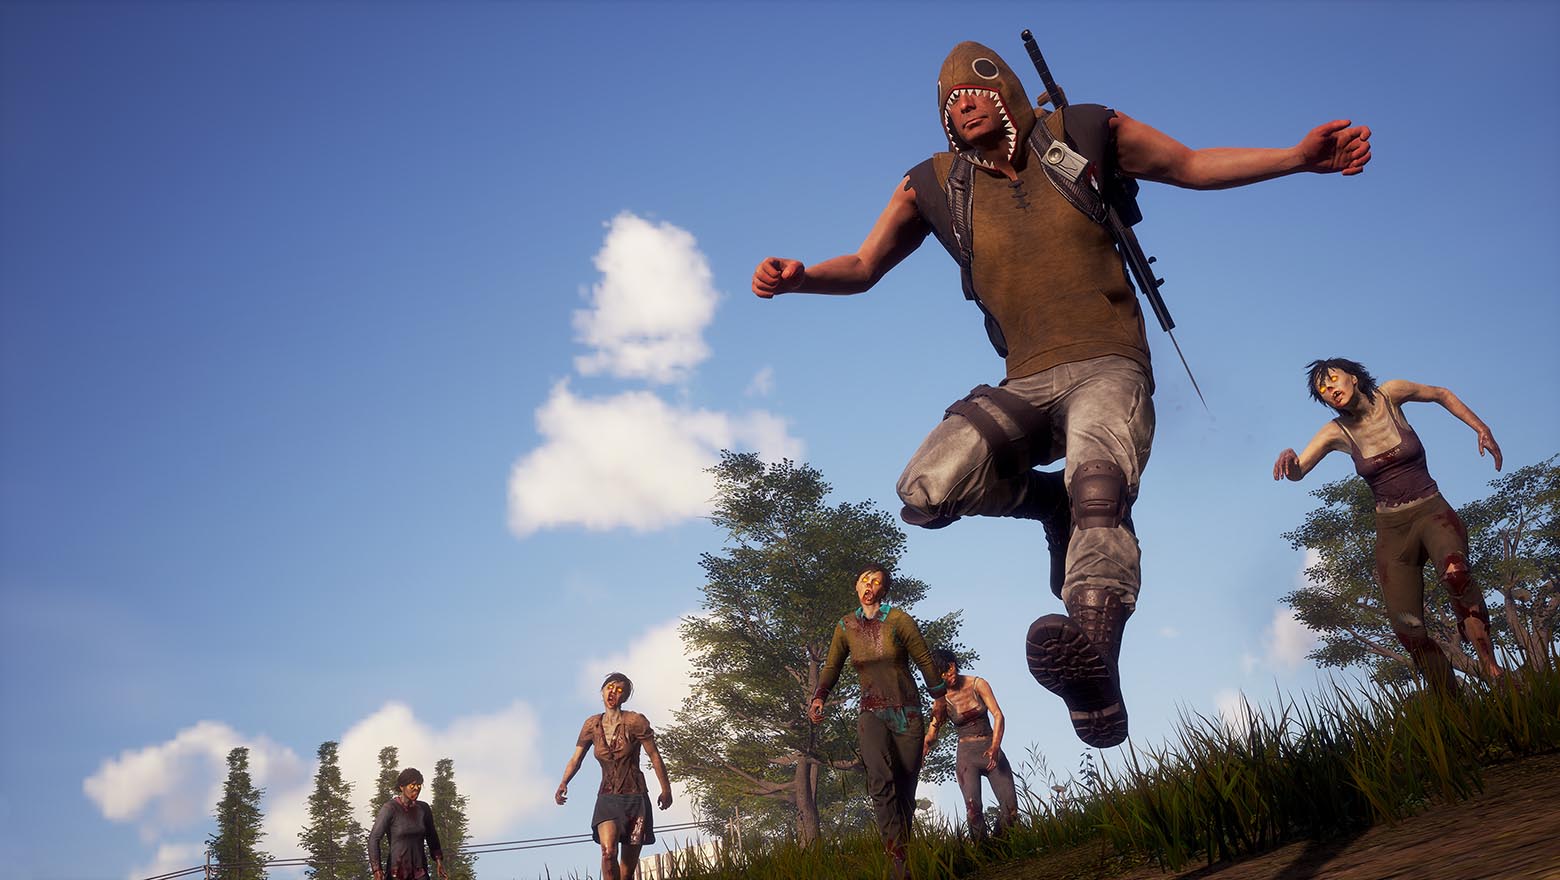 state of decay 2 news